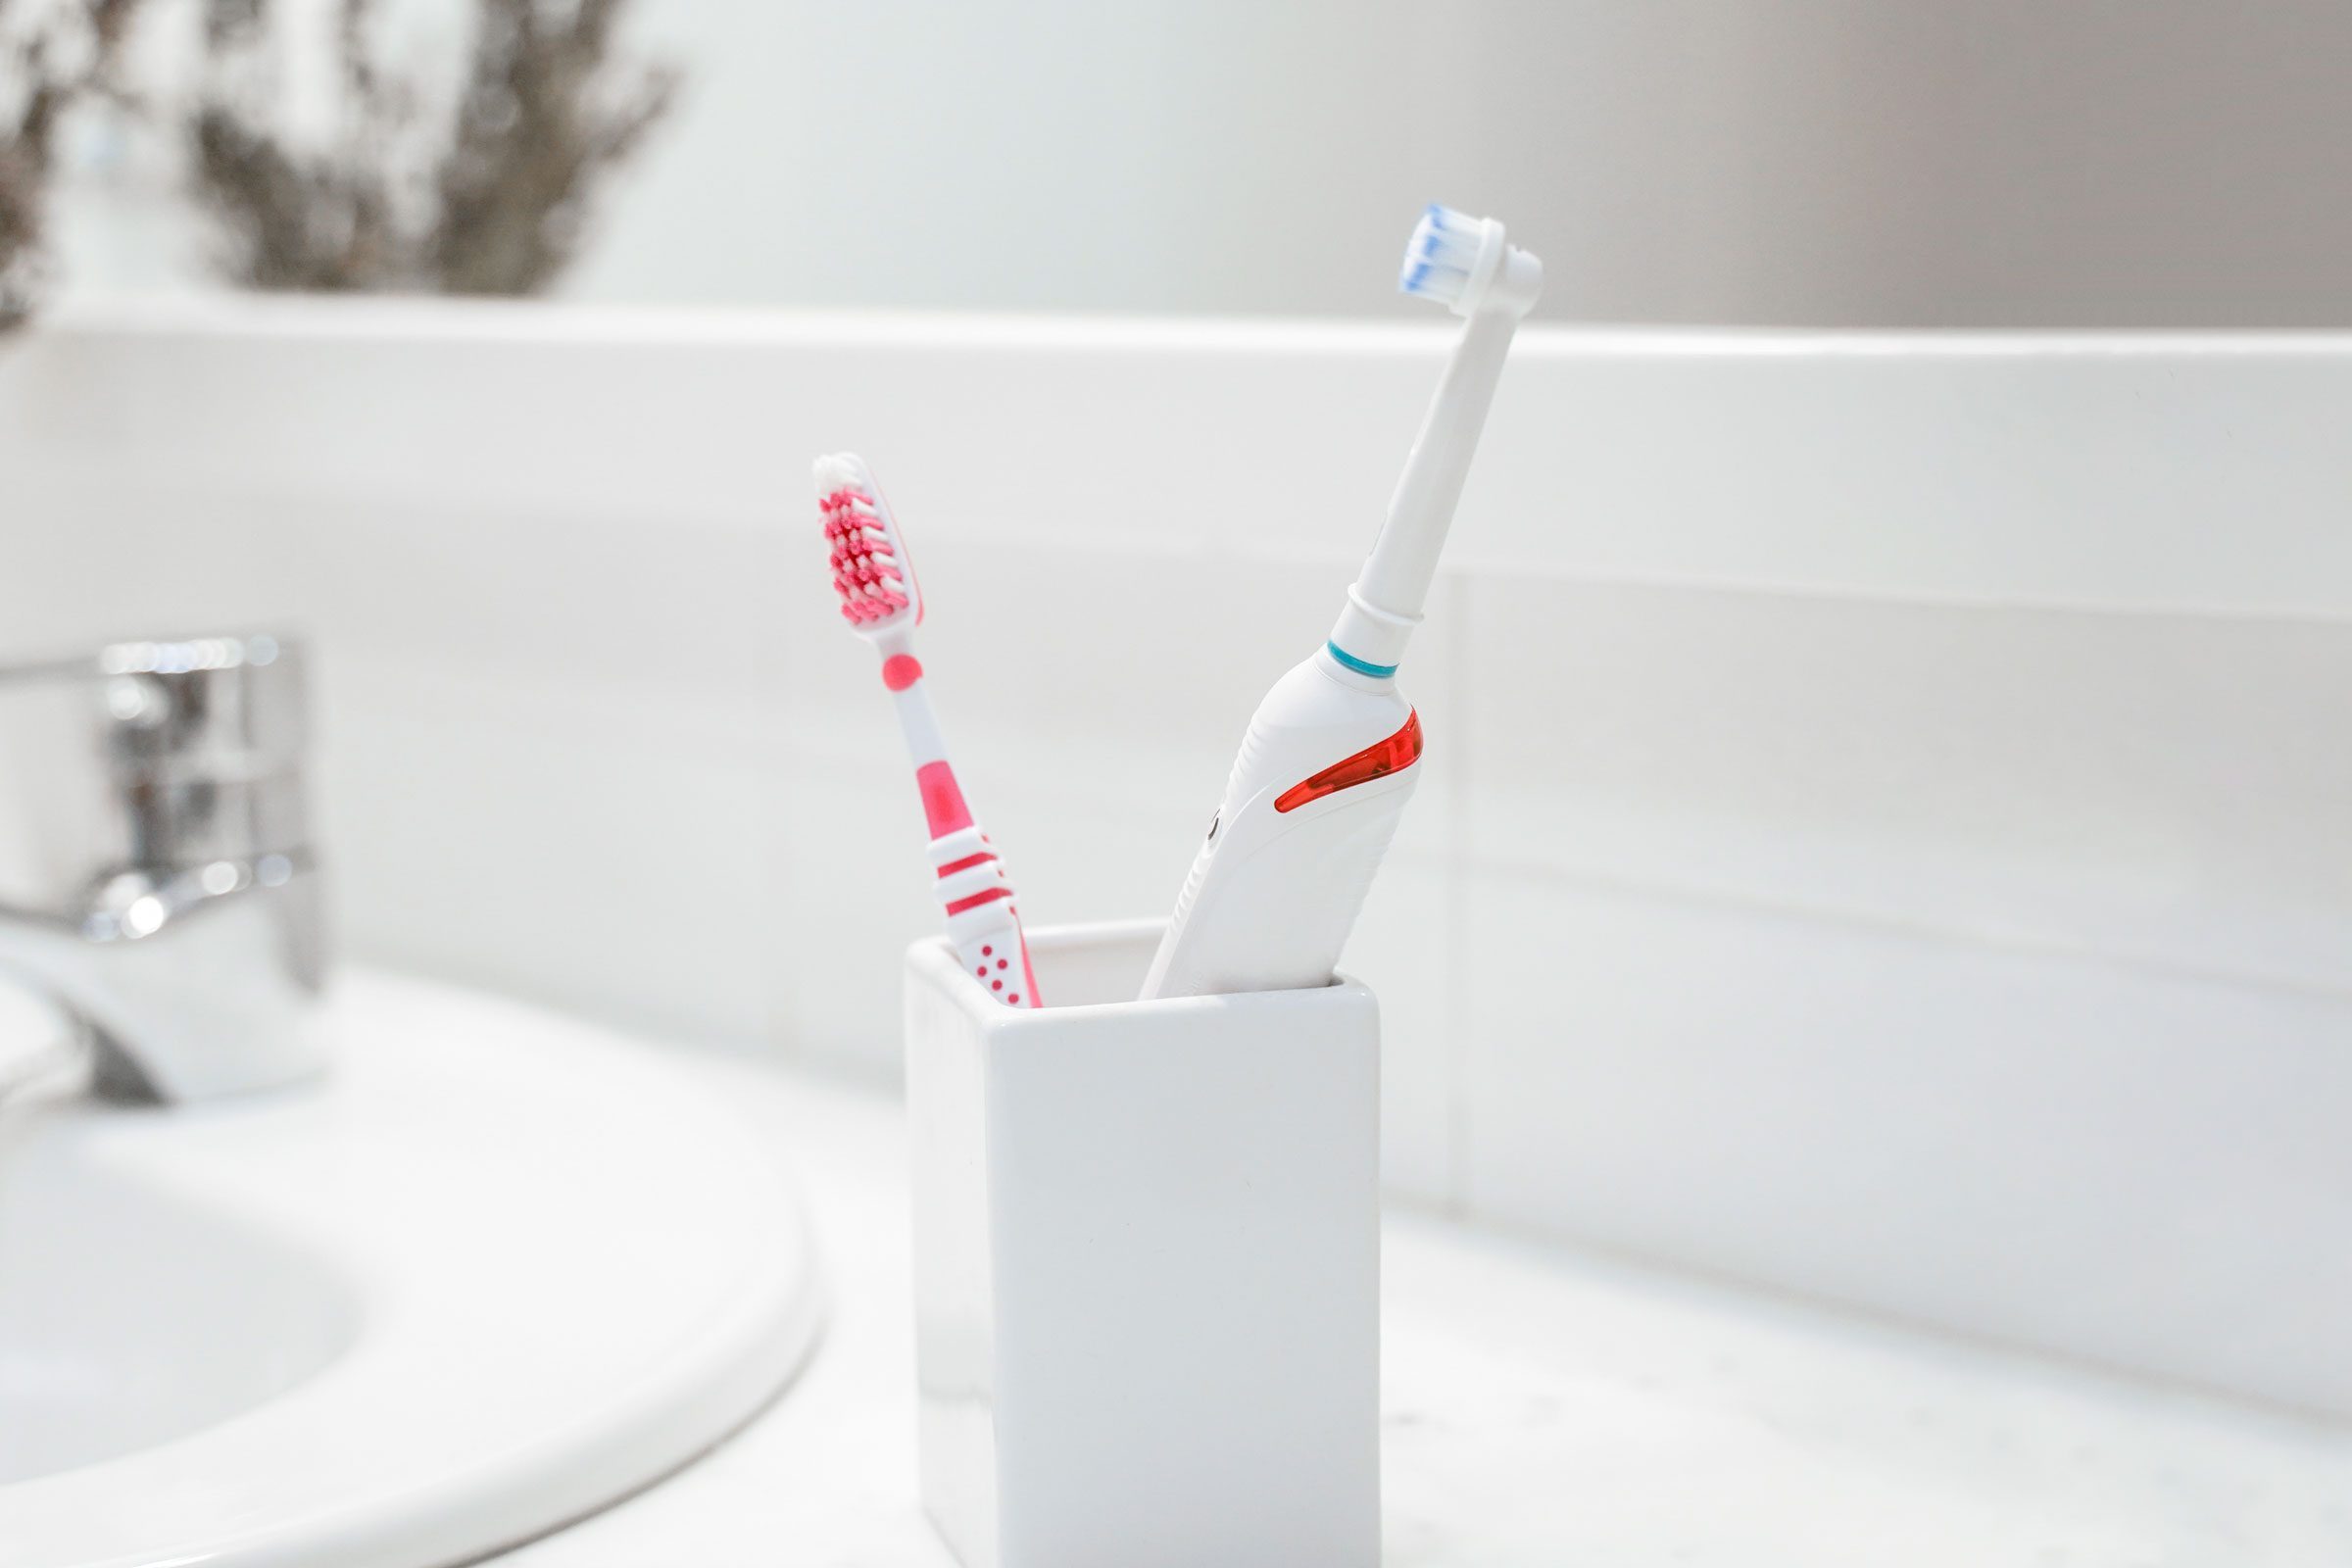 Things to Clean with a Toothbrush